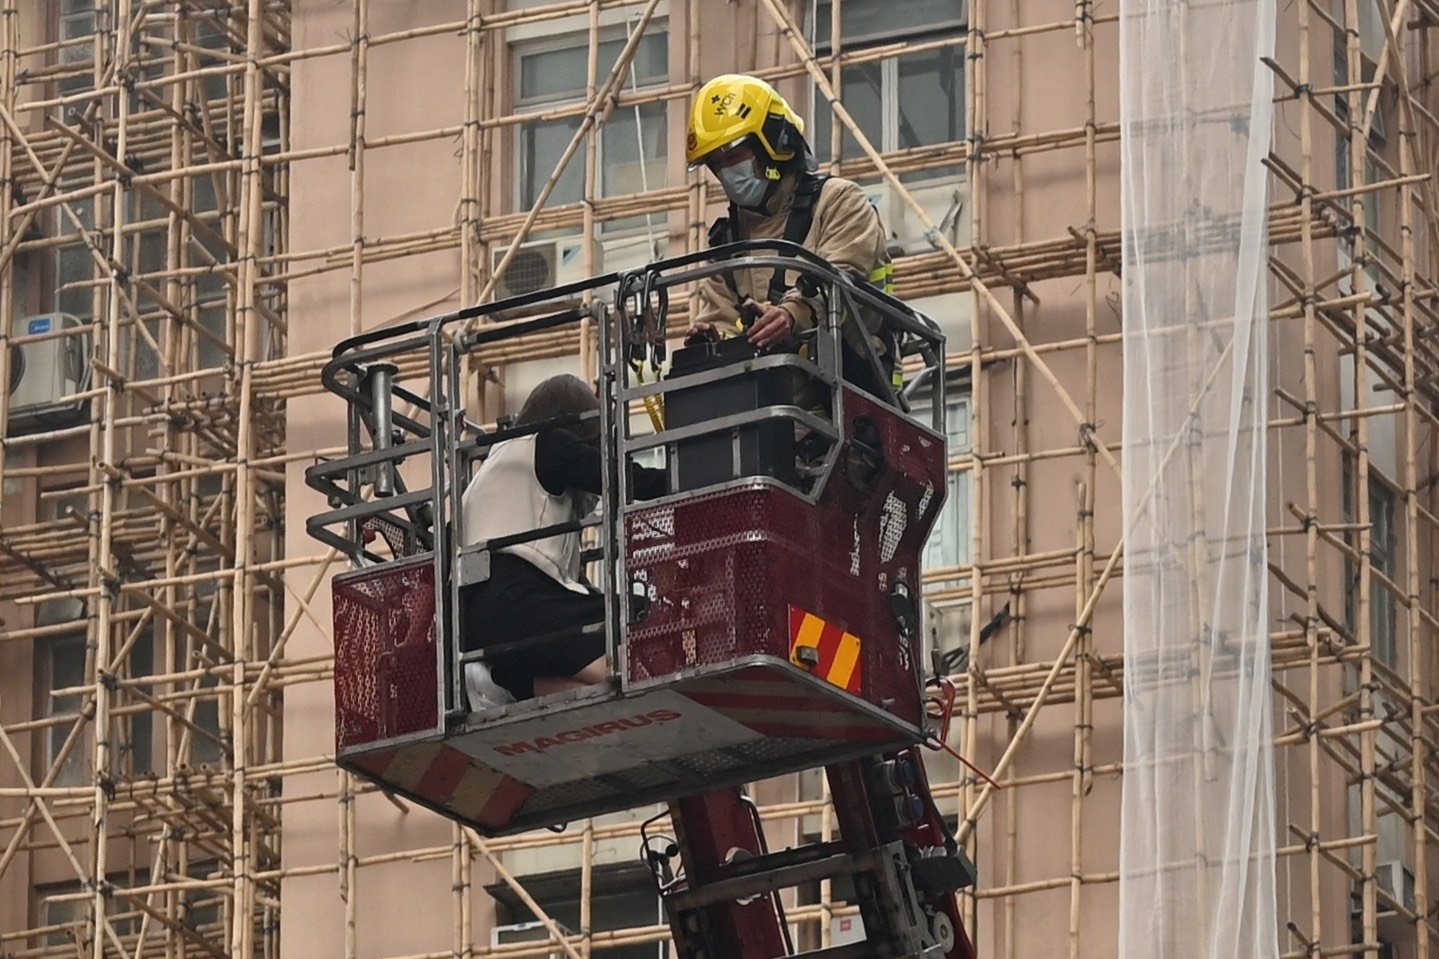 A fireman lowers the crane with a rescued person from Hong Kong's World Trade Center high-rise building, which suffered an electrical fire trapping hundreds on the rooftop, in the city's Causeway Bay district, Dec. 15, 2021. (AFP Photo)